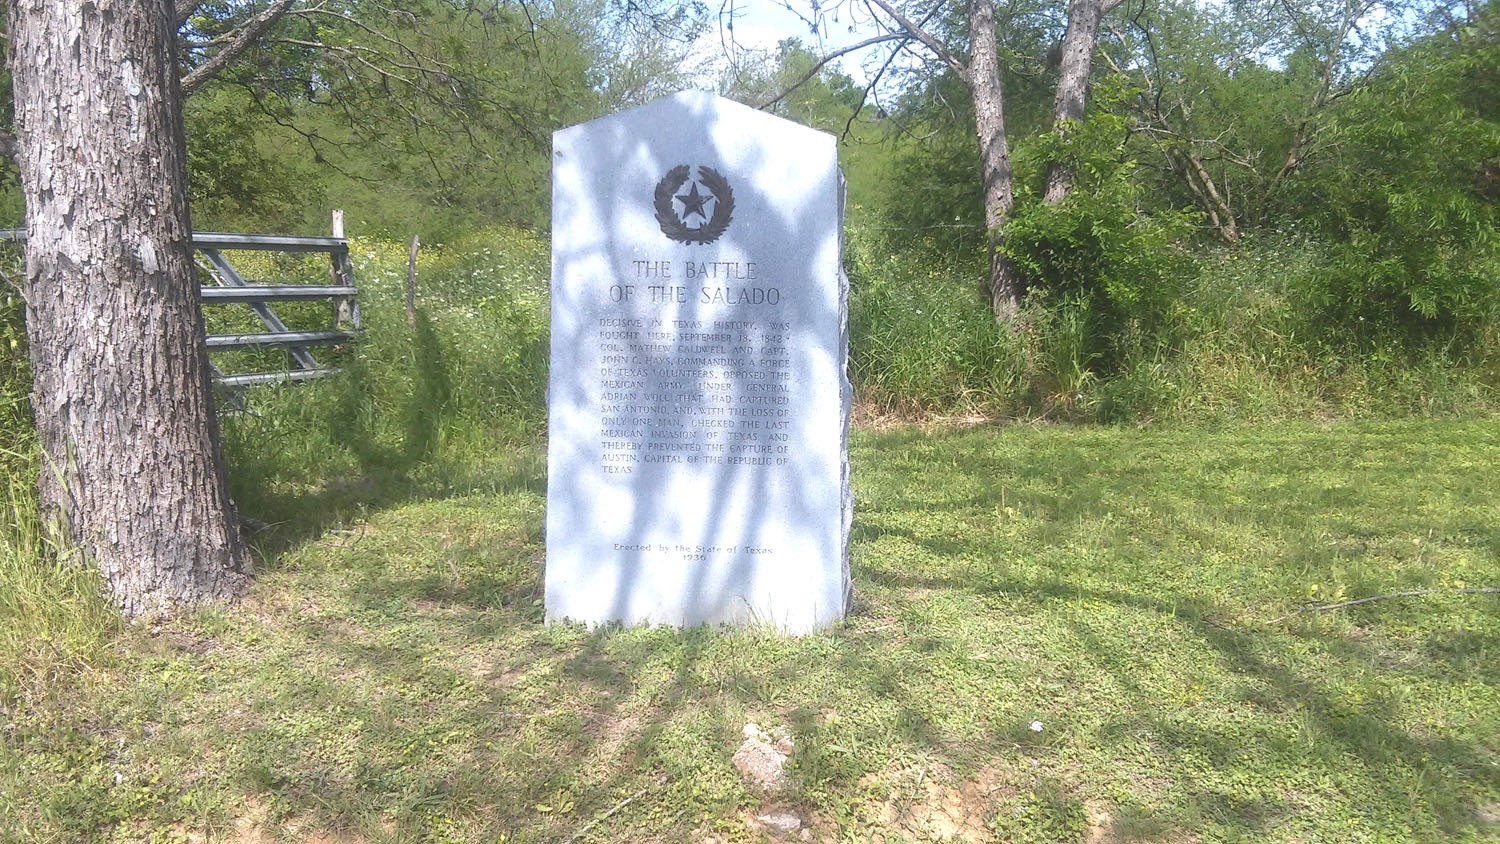 State of Texas historical marker depicting the Salado Battle of September 1842 when Mexican forces captured San Antonio. The Texans fought back and reclaimed the Alamo City